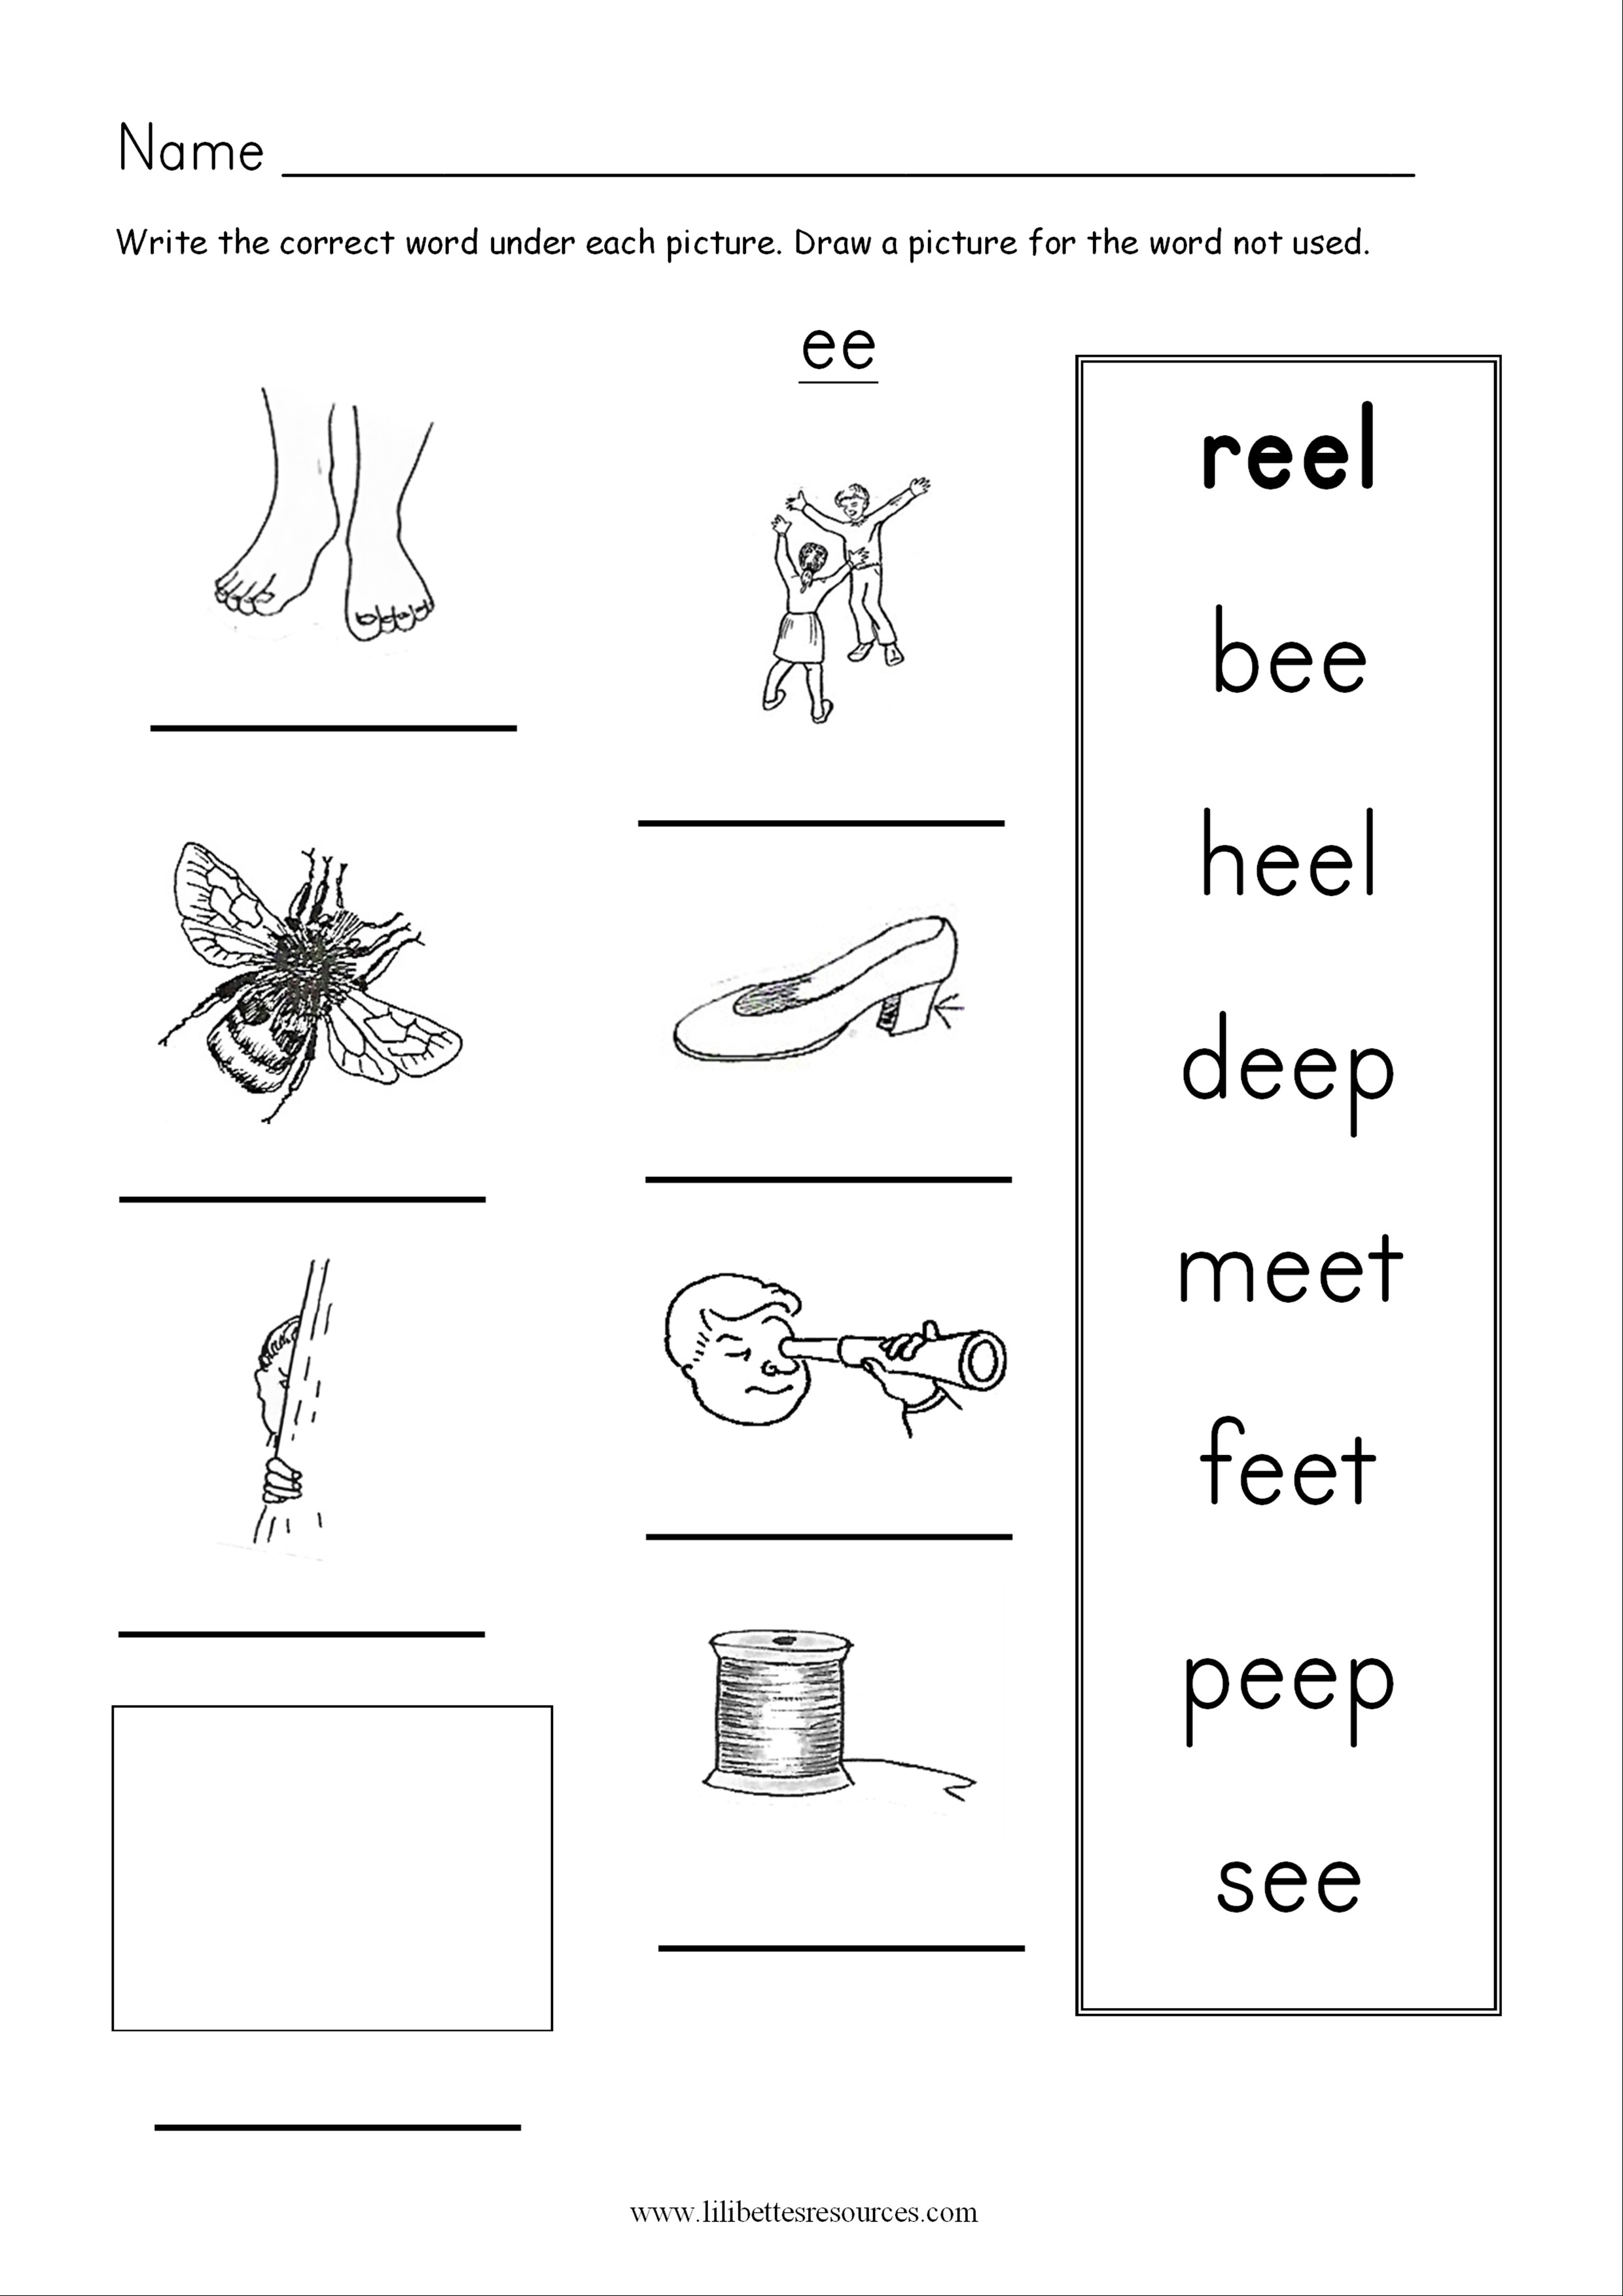 ee-and-ea-worksheets